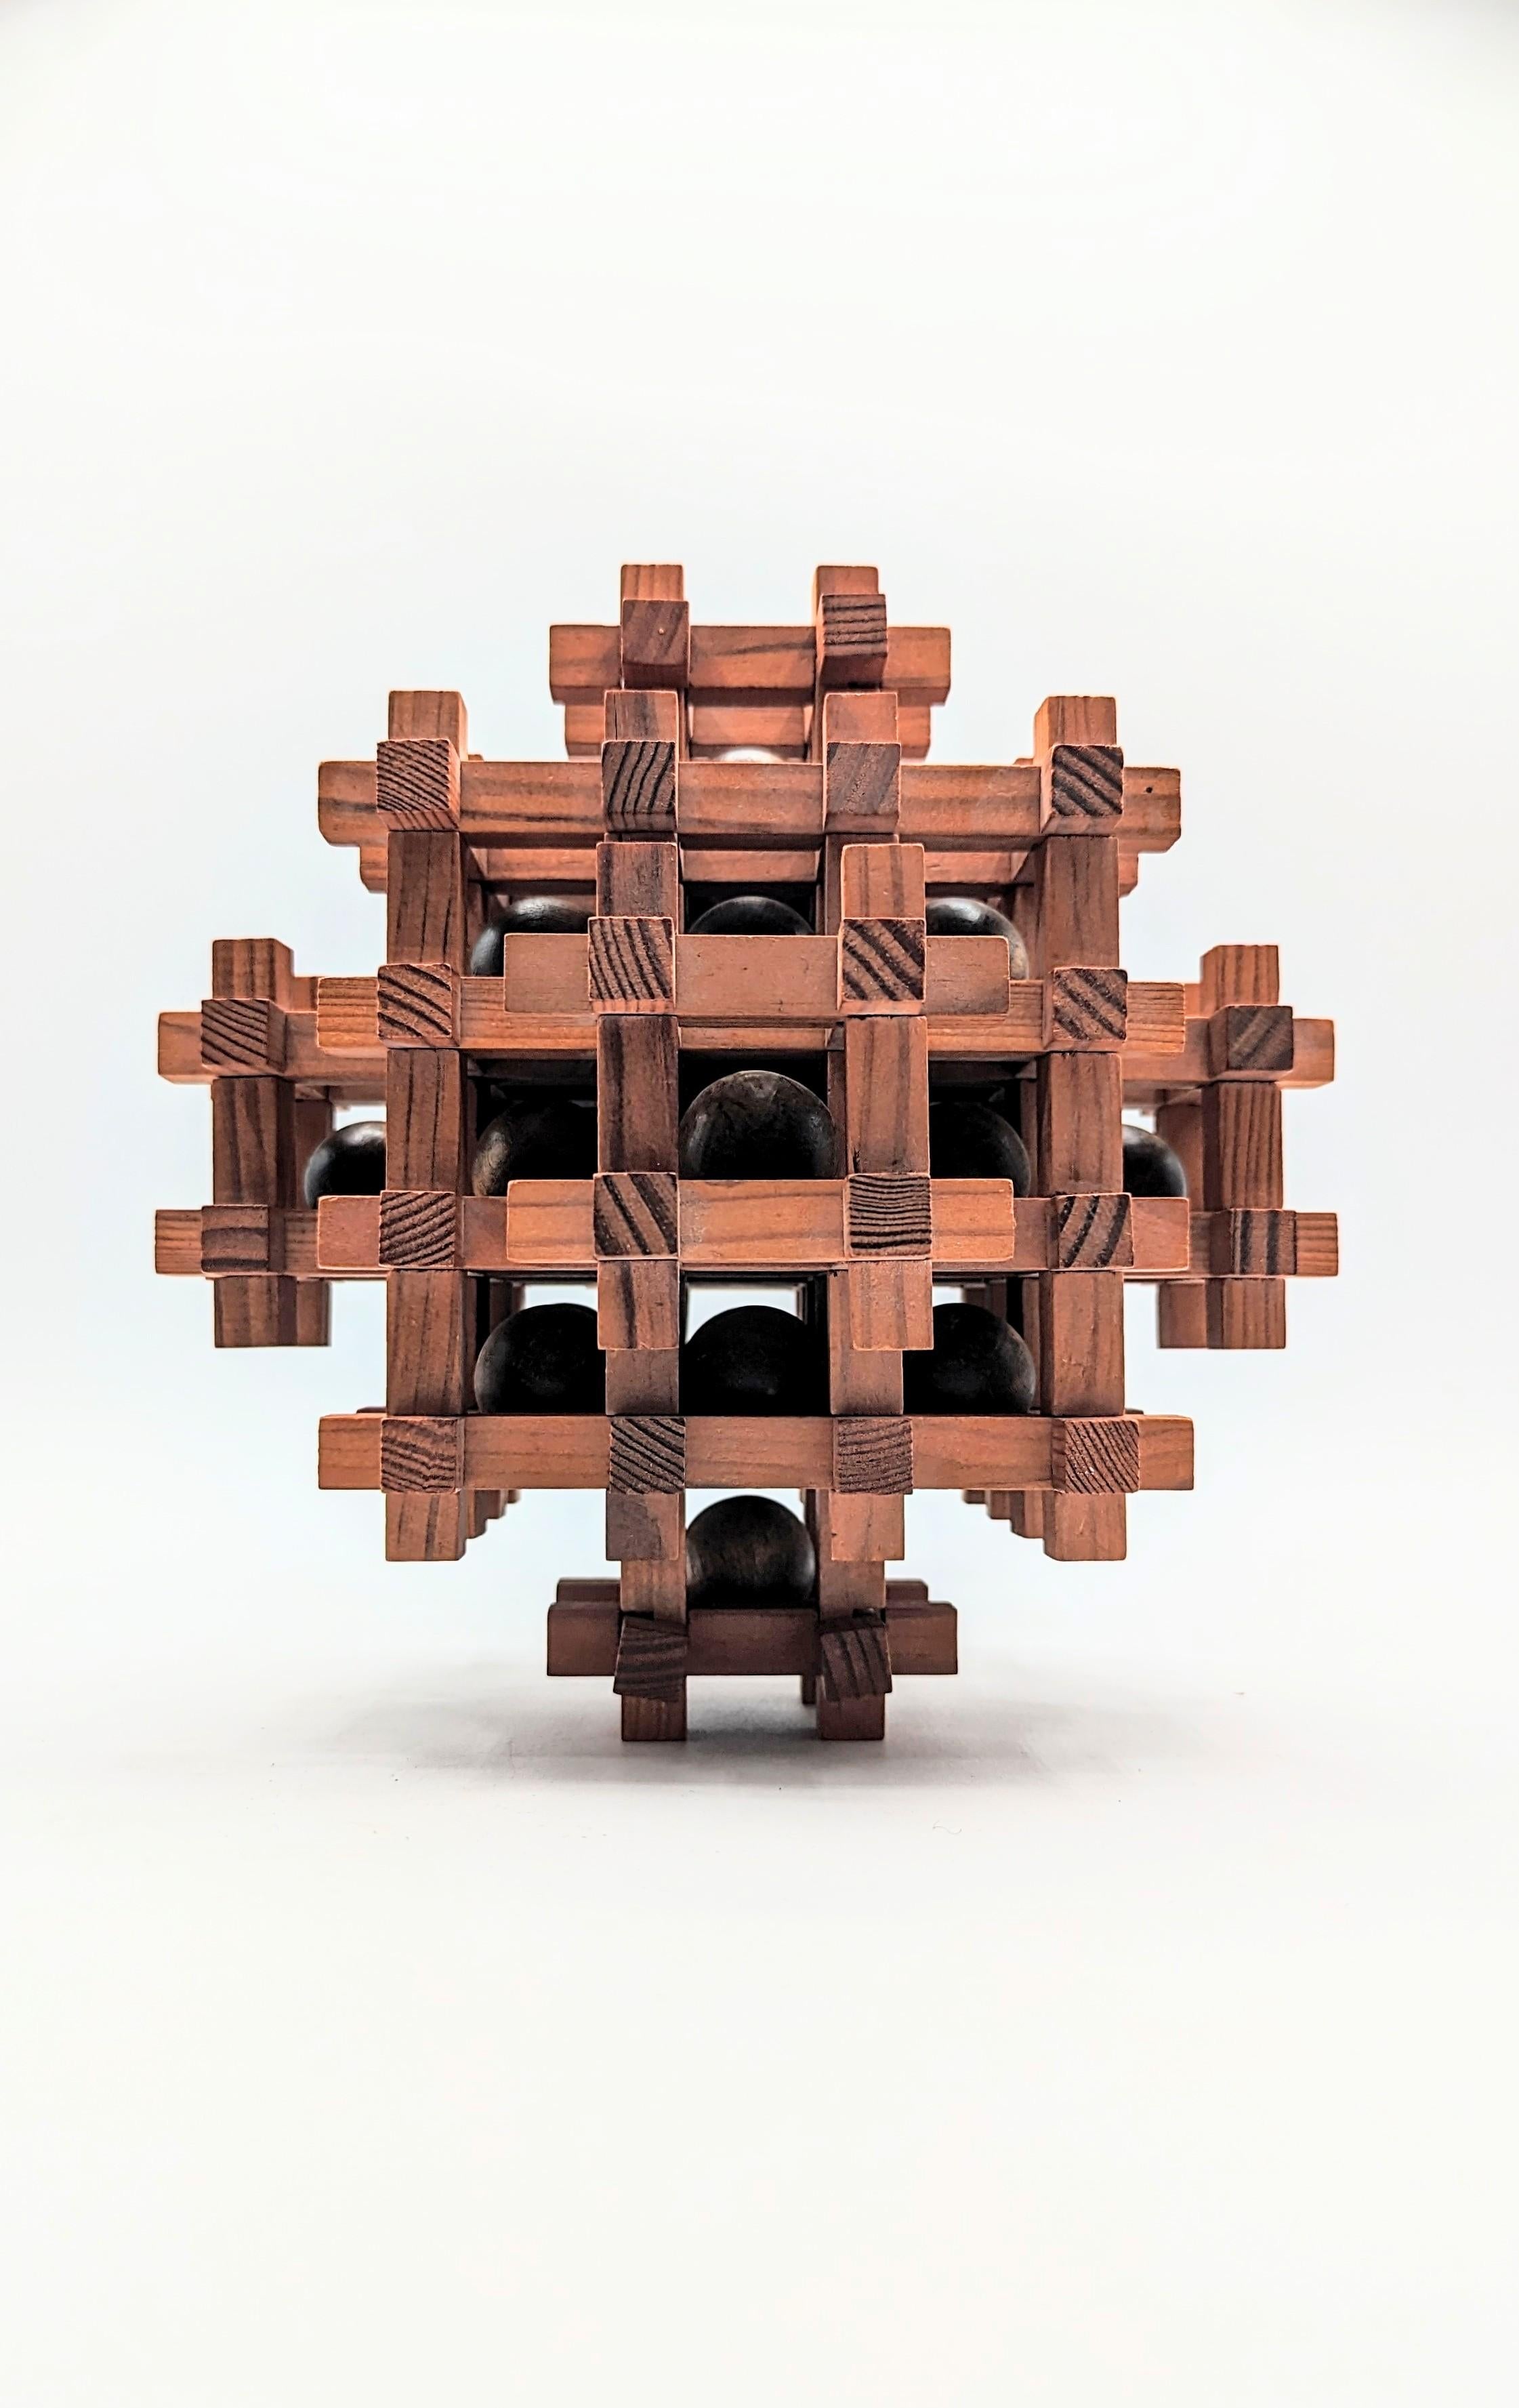 This 5-level, oversized wood puzzle sculpture was made by Sori Yanagi (the designer of the famous butterfly and elephant stools). Yanagi designed a limited series of puzzles, so they are very collectible and hard to find.

Sori was the son of the